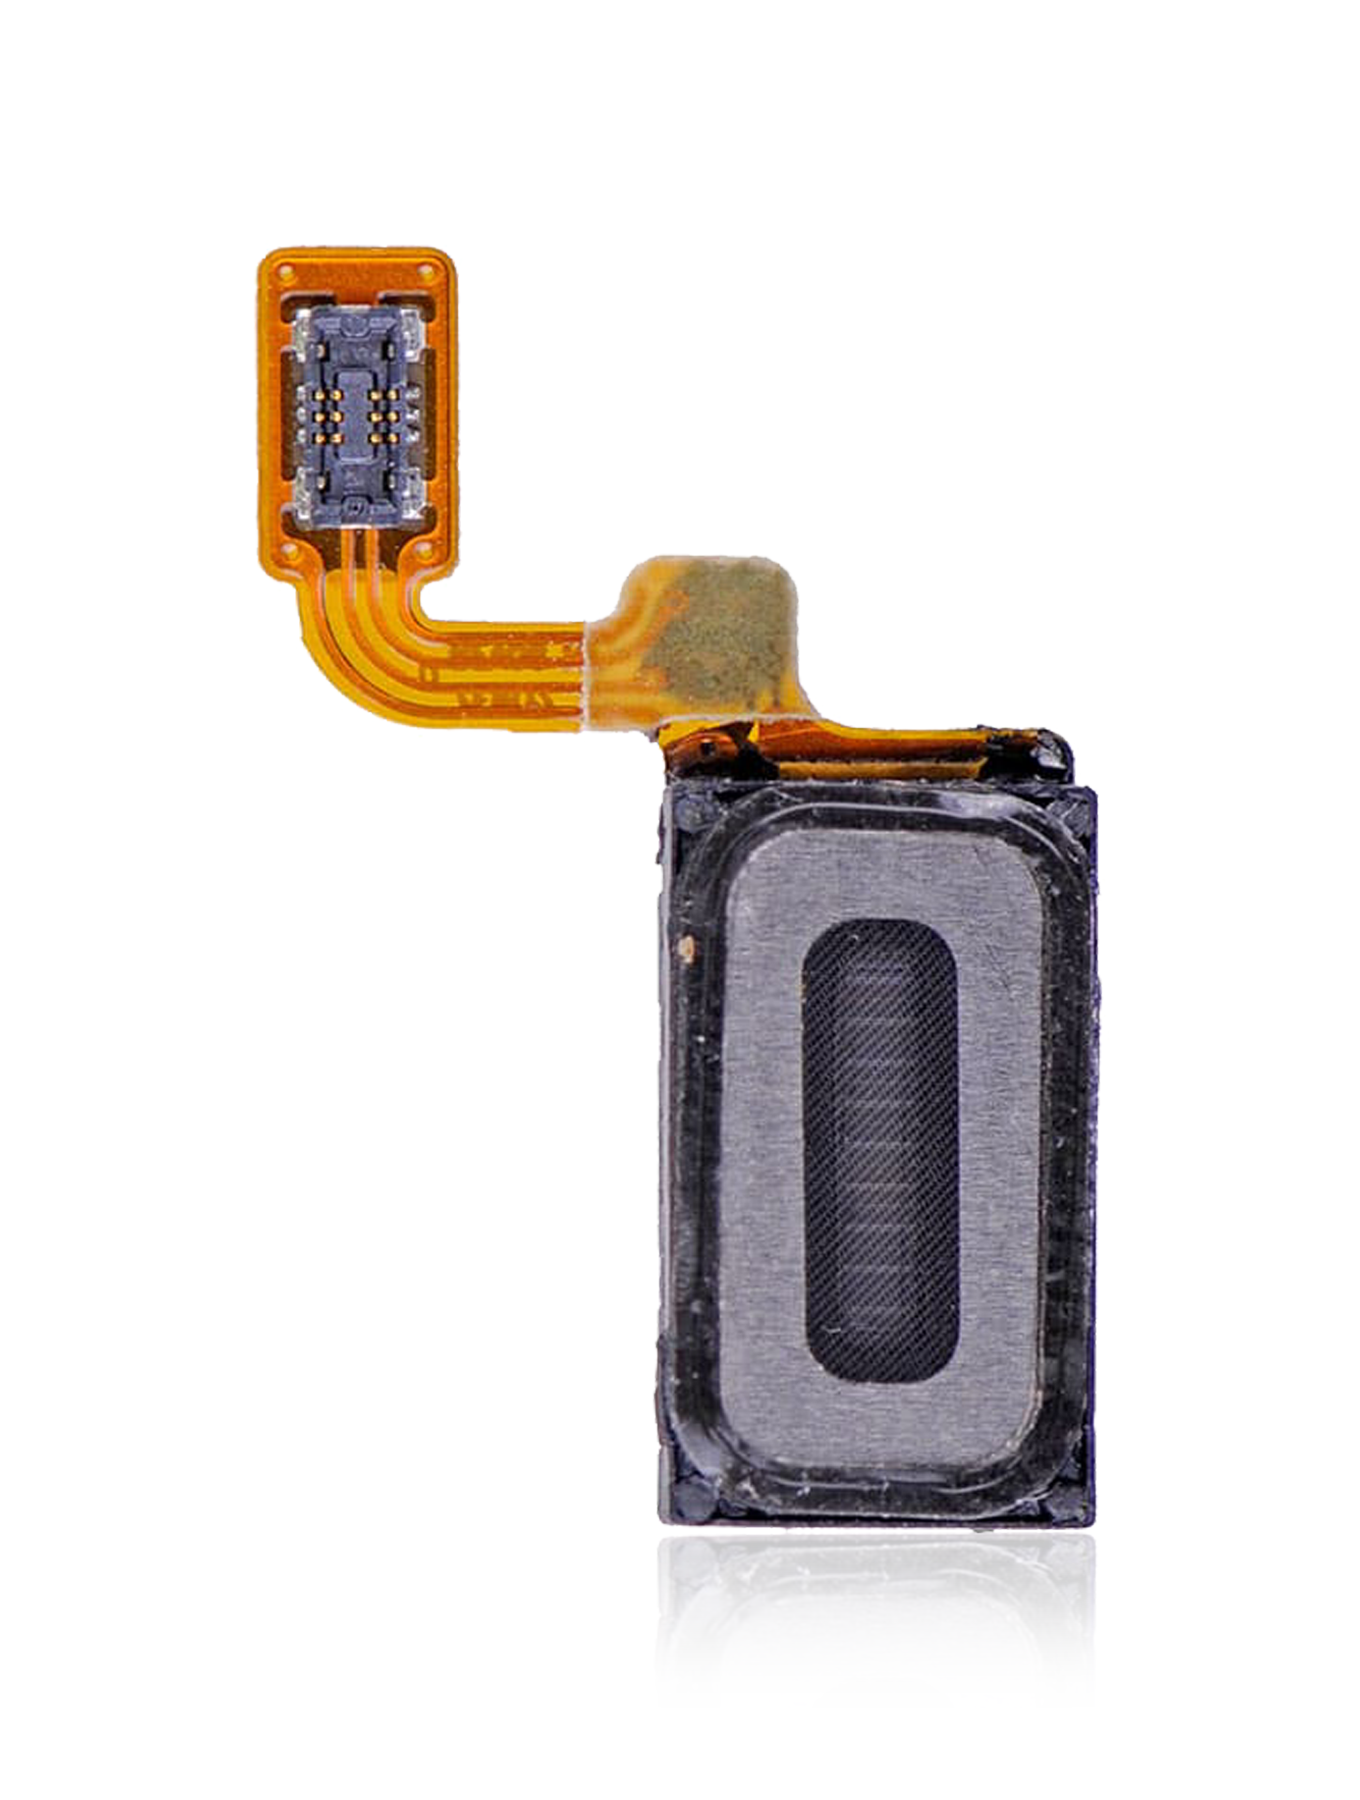 For Samsung Galaxy S6 Edge Plus Ear Speaker Replacement